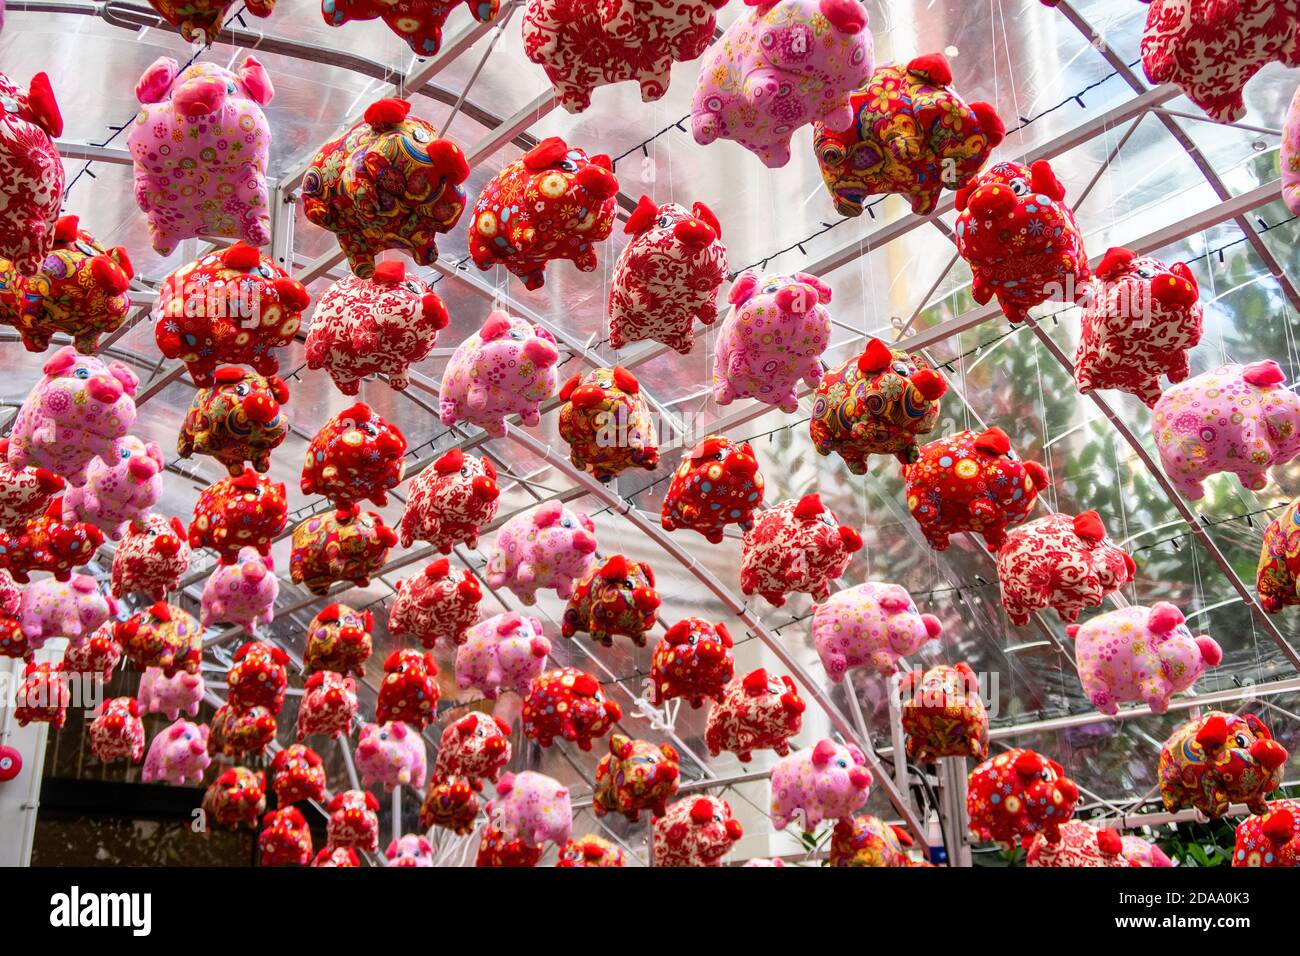 Red and pink fluffy toy pig decorations hanging, for Chinese New Year celebration, Year of the Pig, in Chinatown, Singapore. Stock Photo